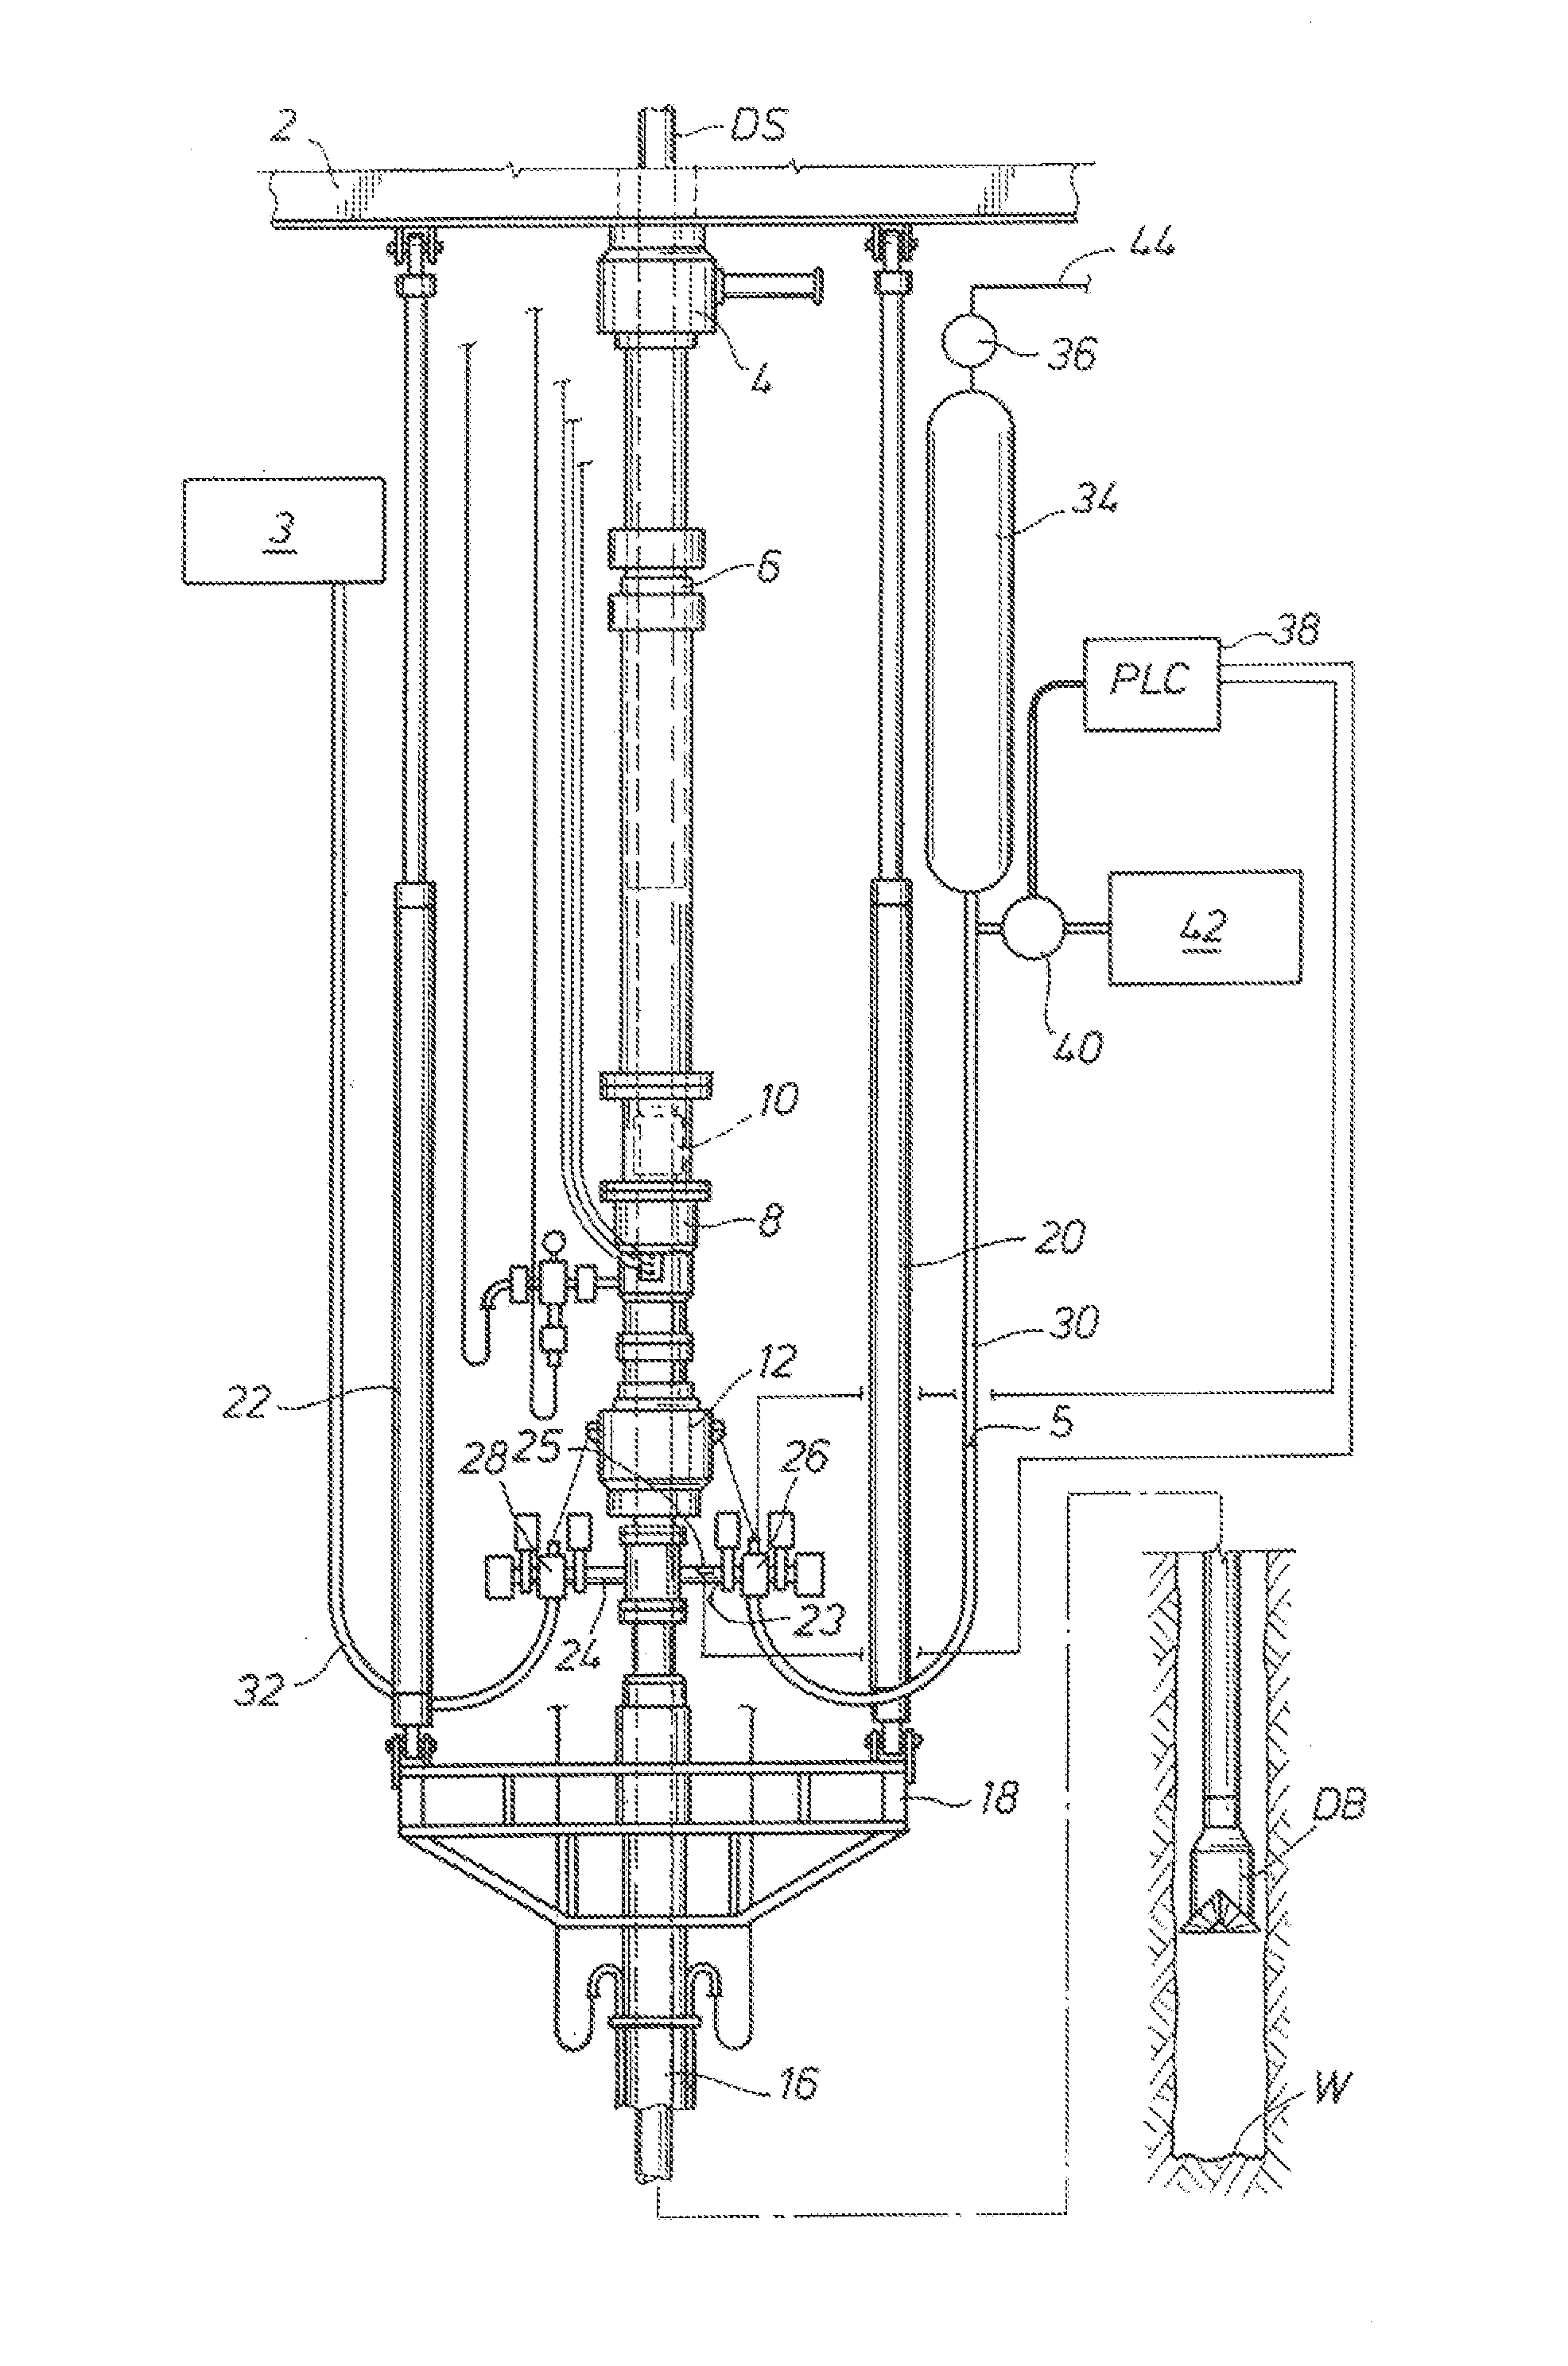 System and Method for Managing Heave Pressure from a Floating Rig